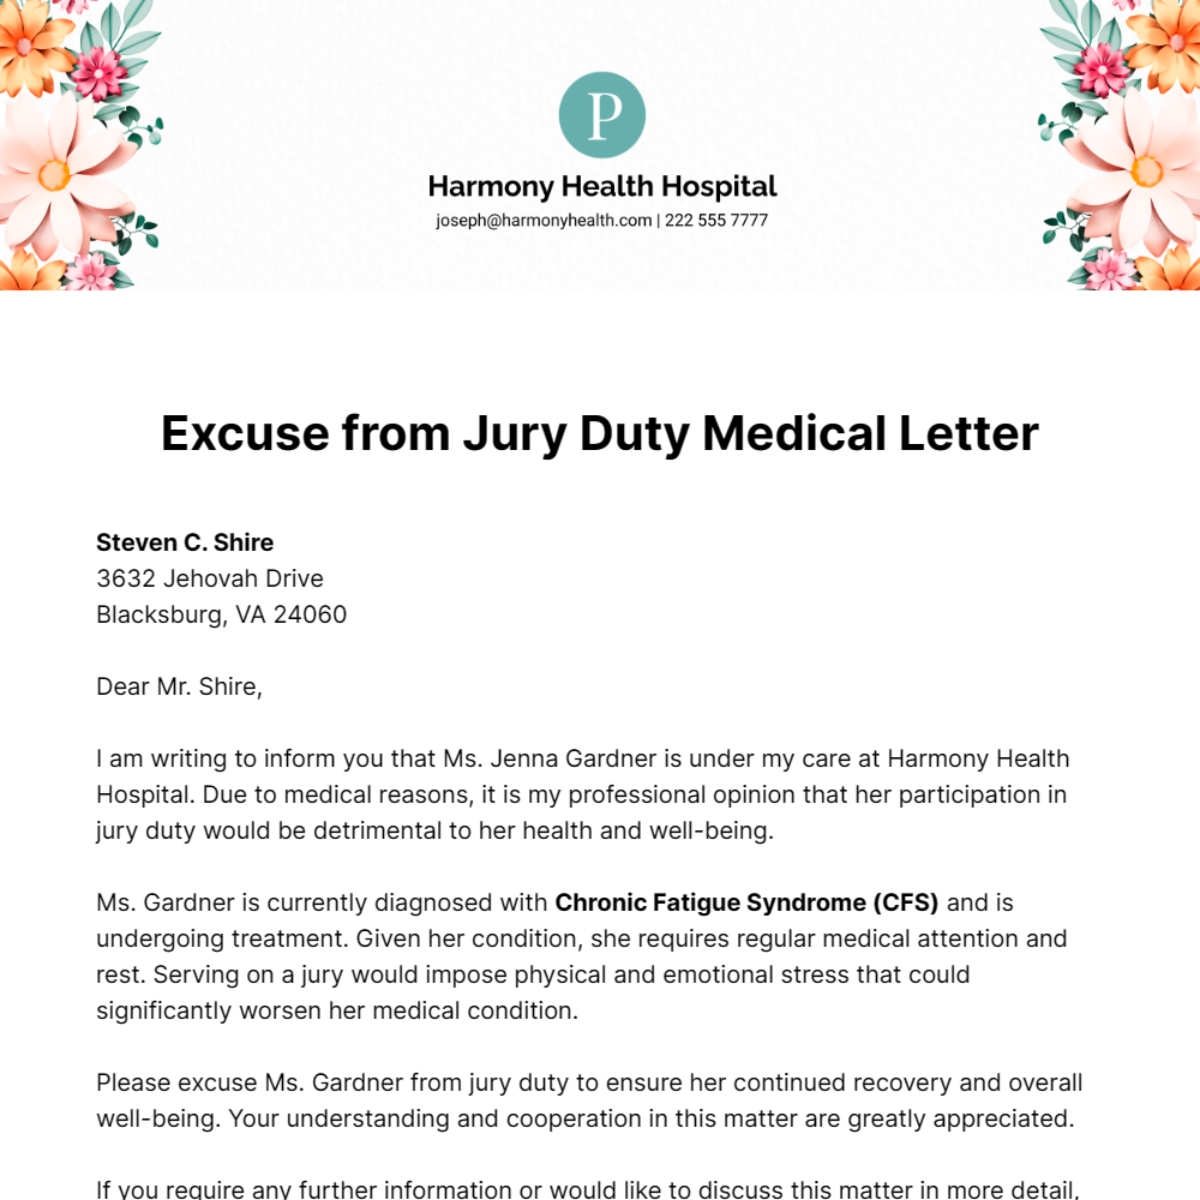 Excuse from Jury Duty Medical Letter Template